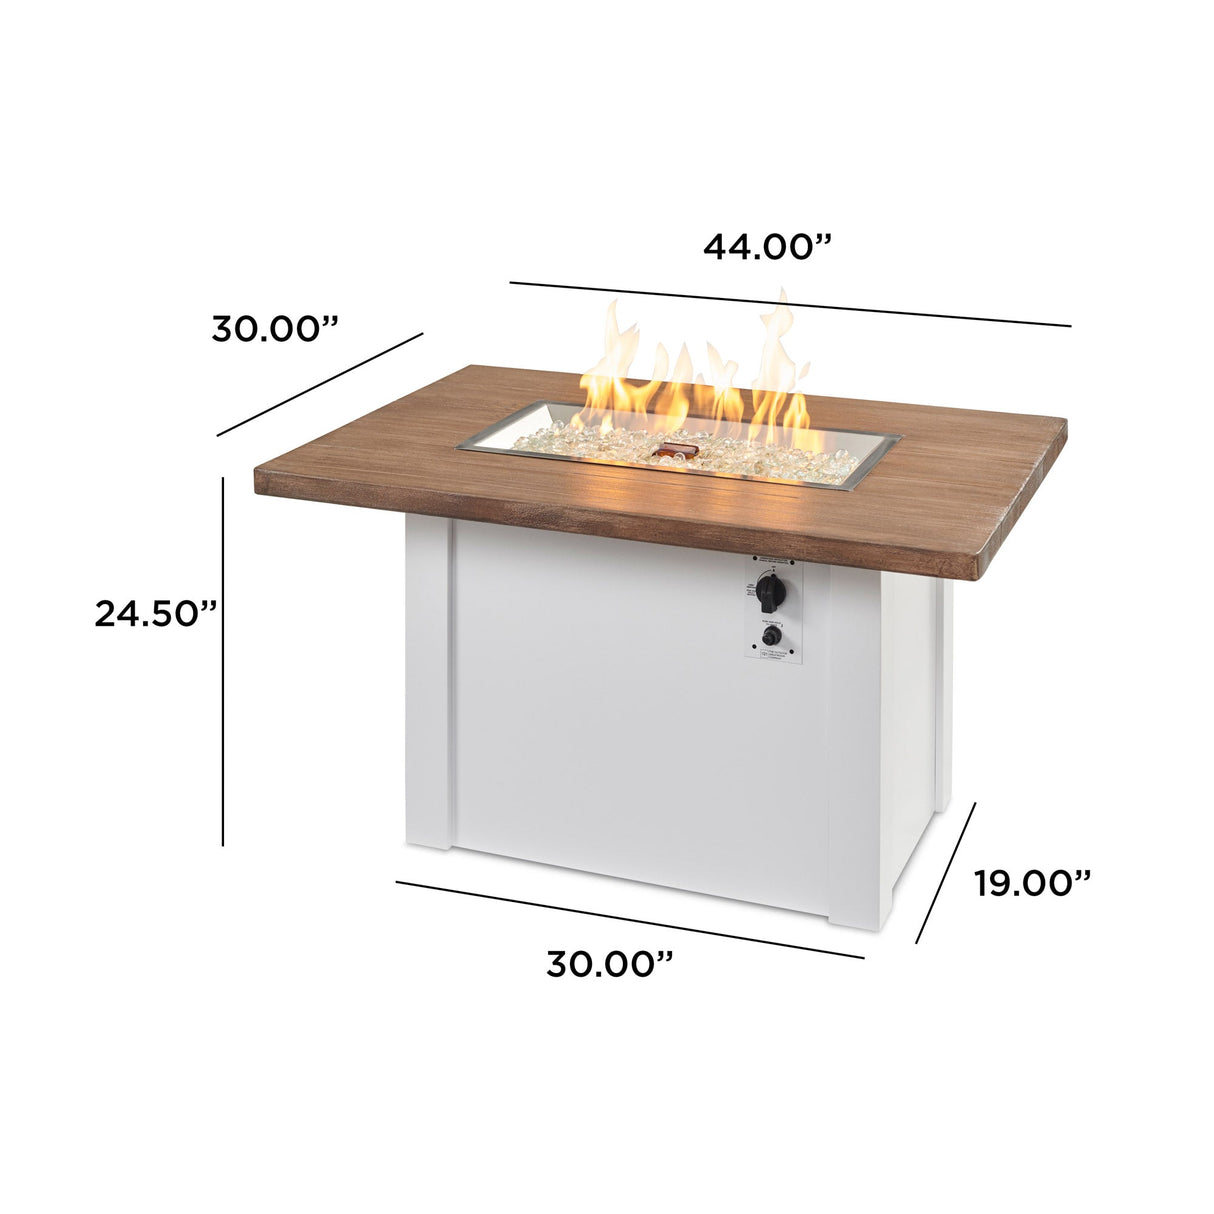 Dimensions overlaid on the Havenwood Rectangular Gas Fire Pit Table with a Driftwood top and White base